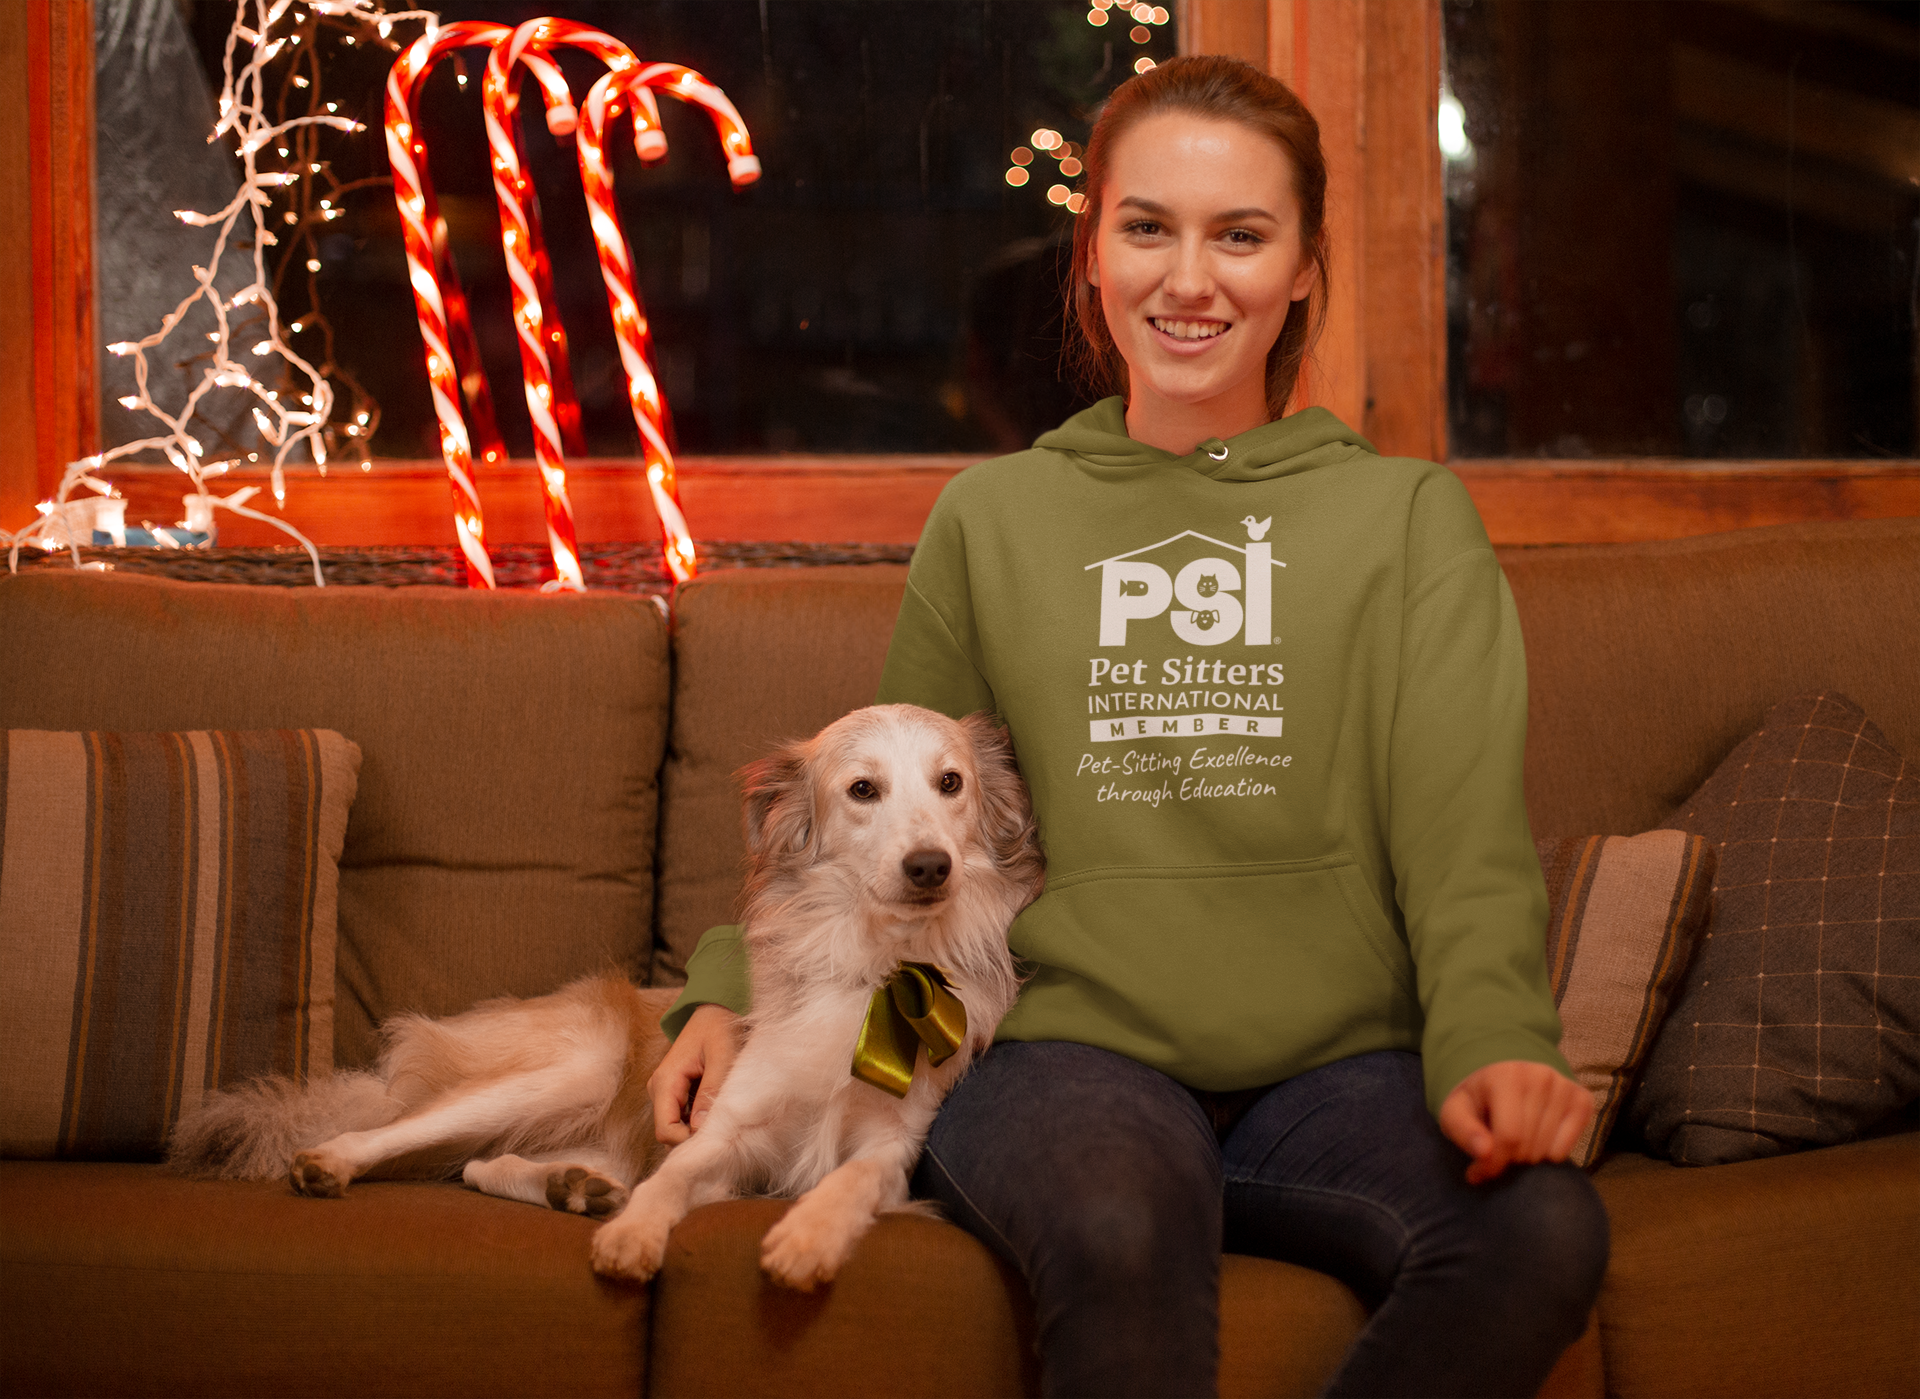 Pet Sitters International offers tips for selecting a pet sitter for last-minute holiday plans